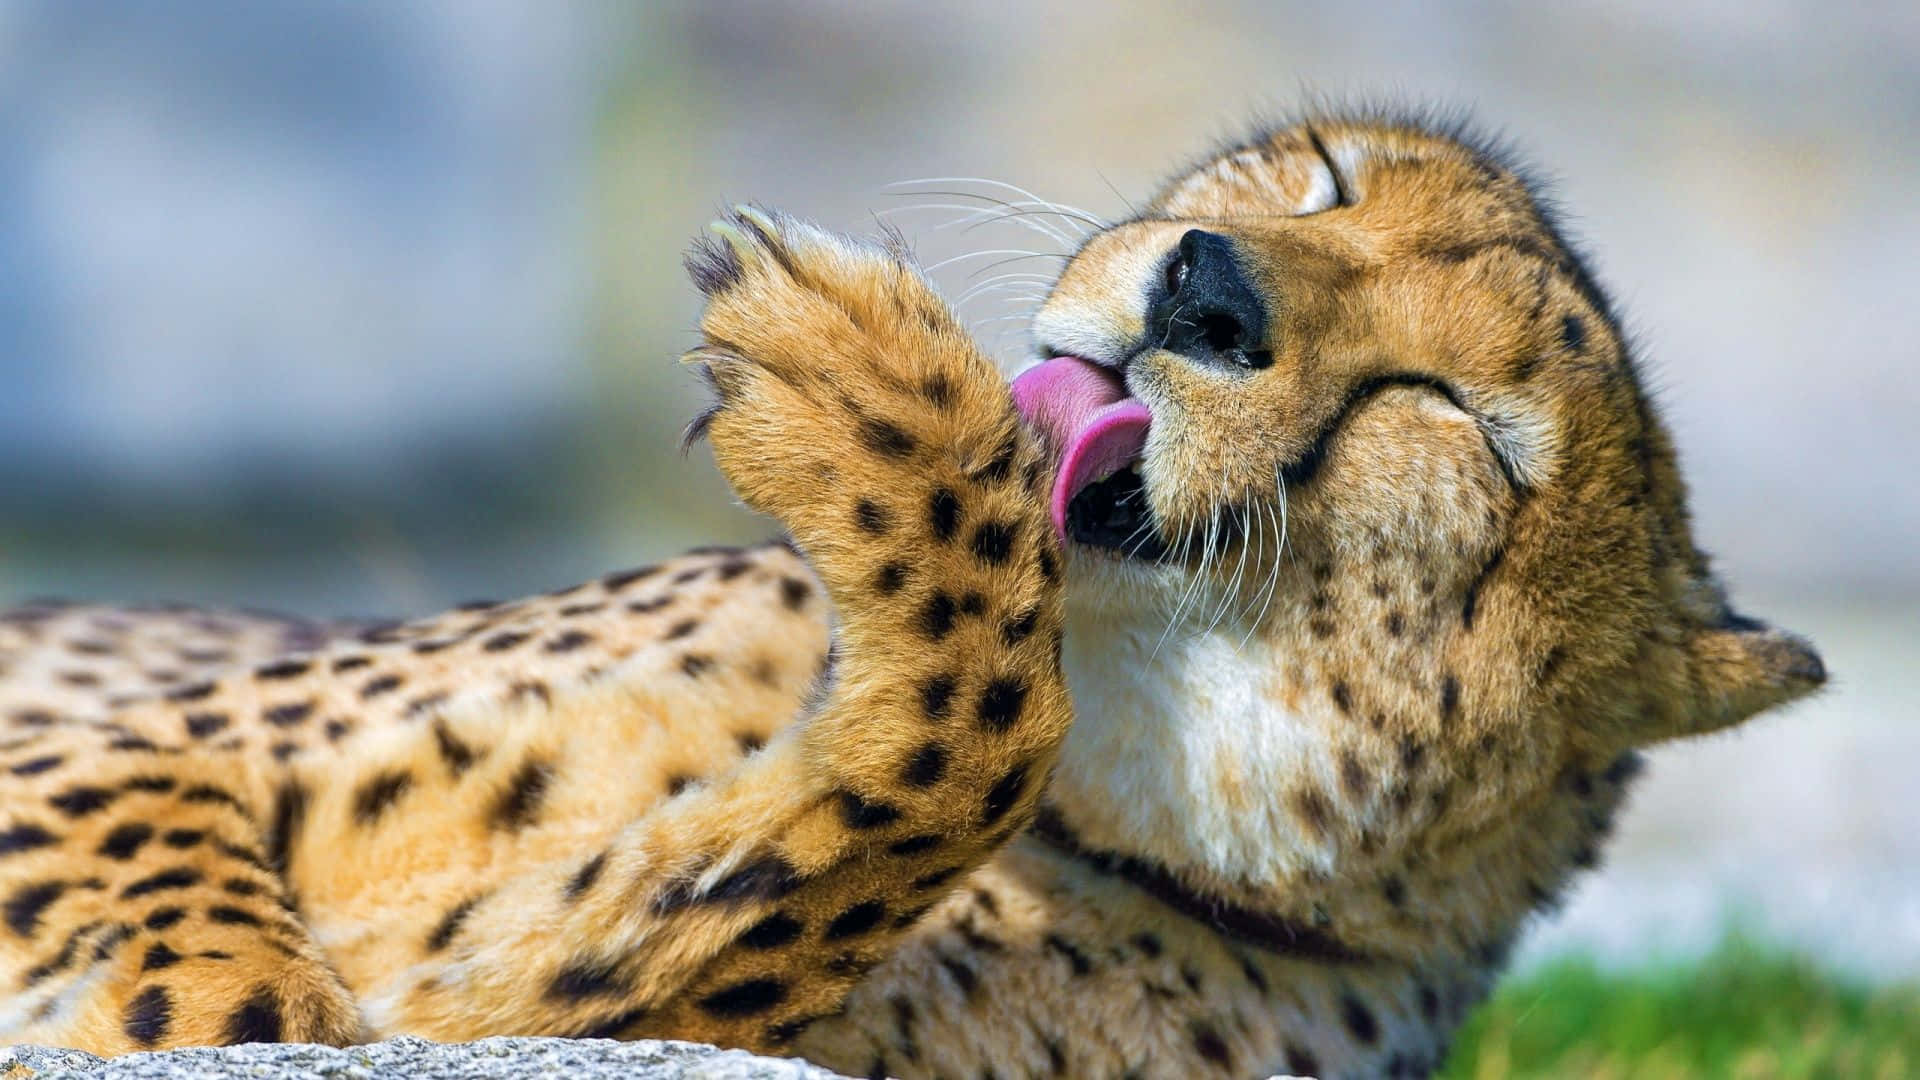 A close-up view of a Cheetah's face in its natural habitat.